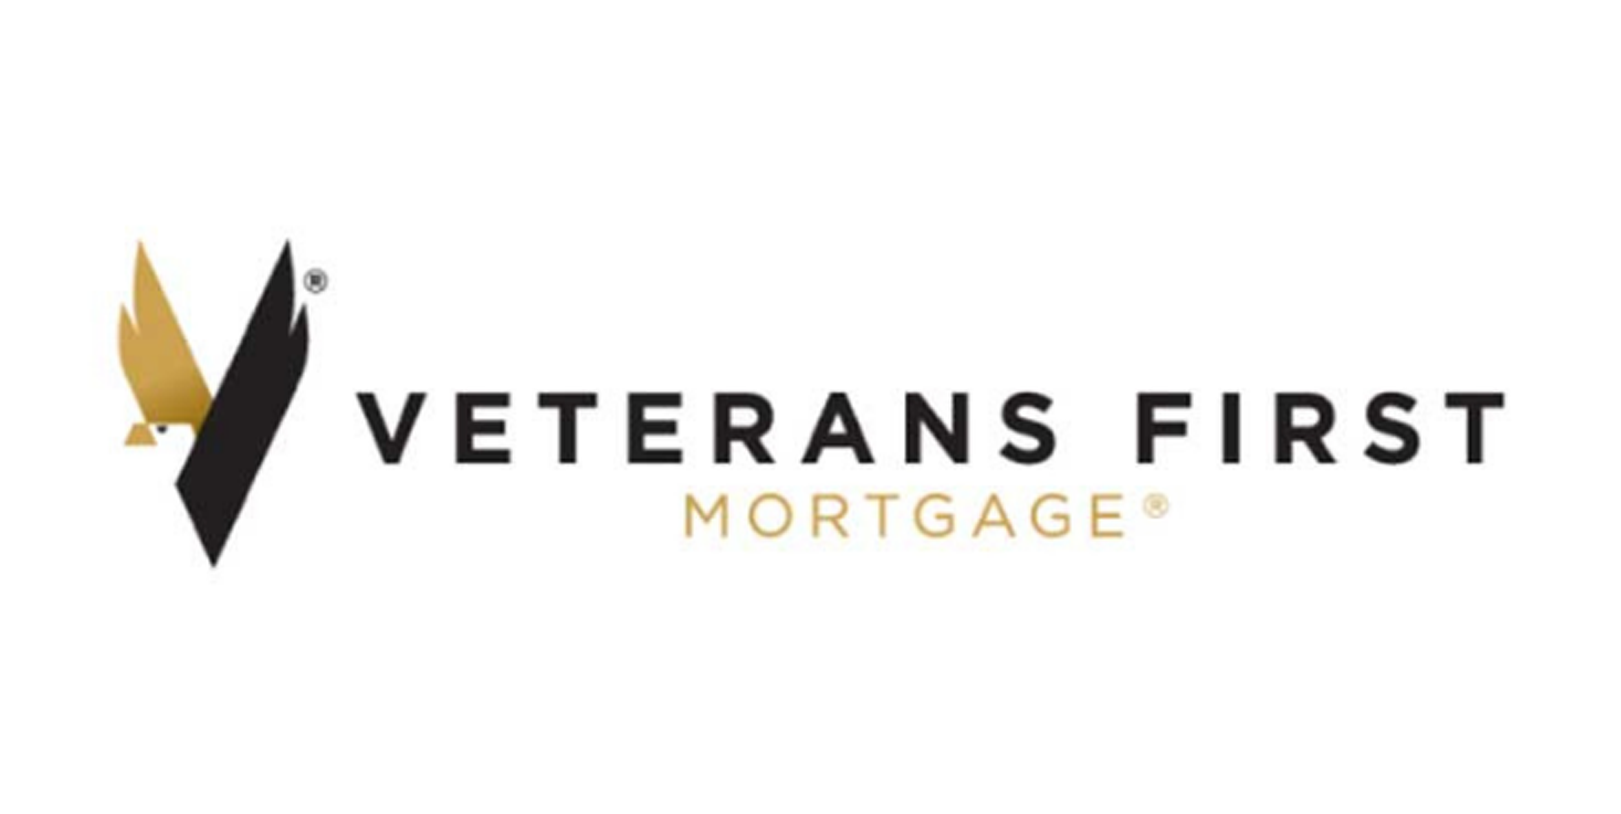 The Malinois Foundation - Trusted Utah Service Dog Veterans First Mortgage